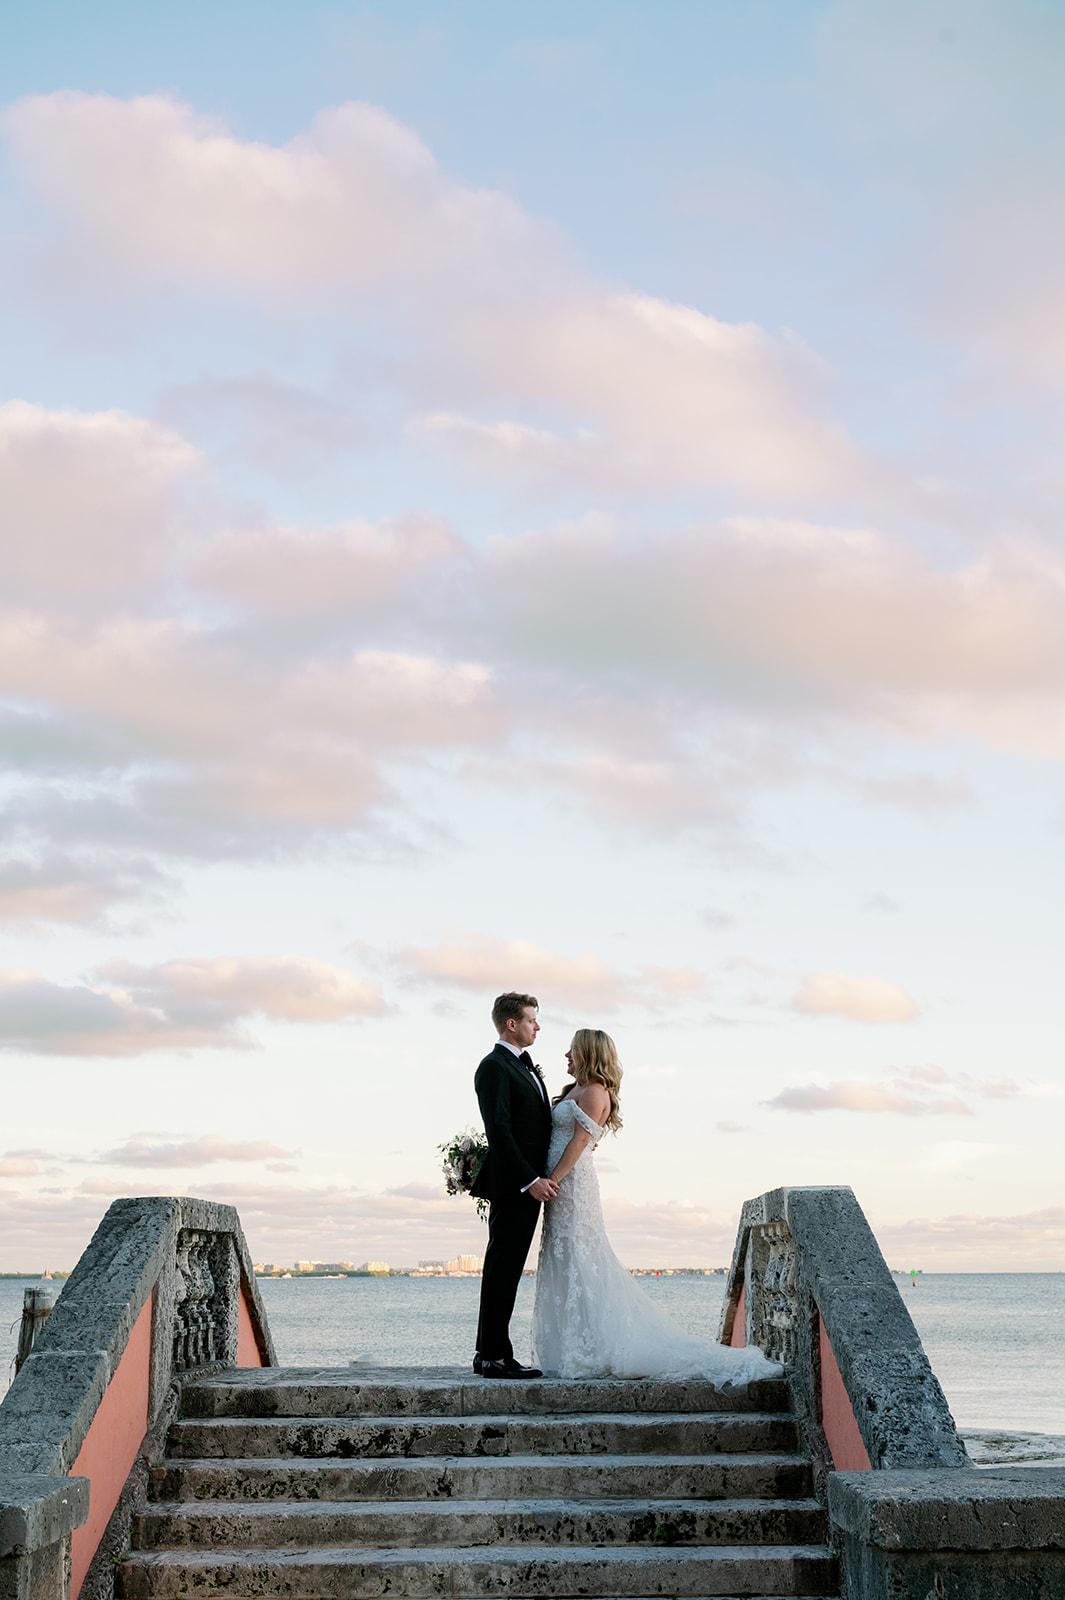 Bride and groom sunset photo on the dock stairs at Vizcaya Museum and Gardens.